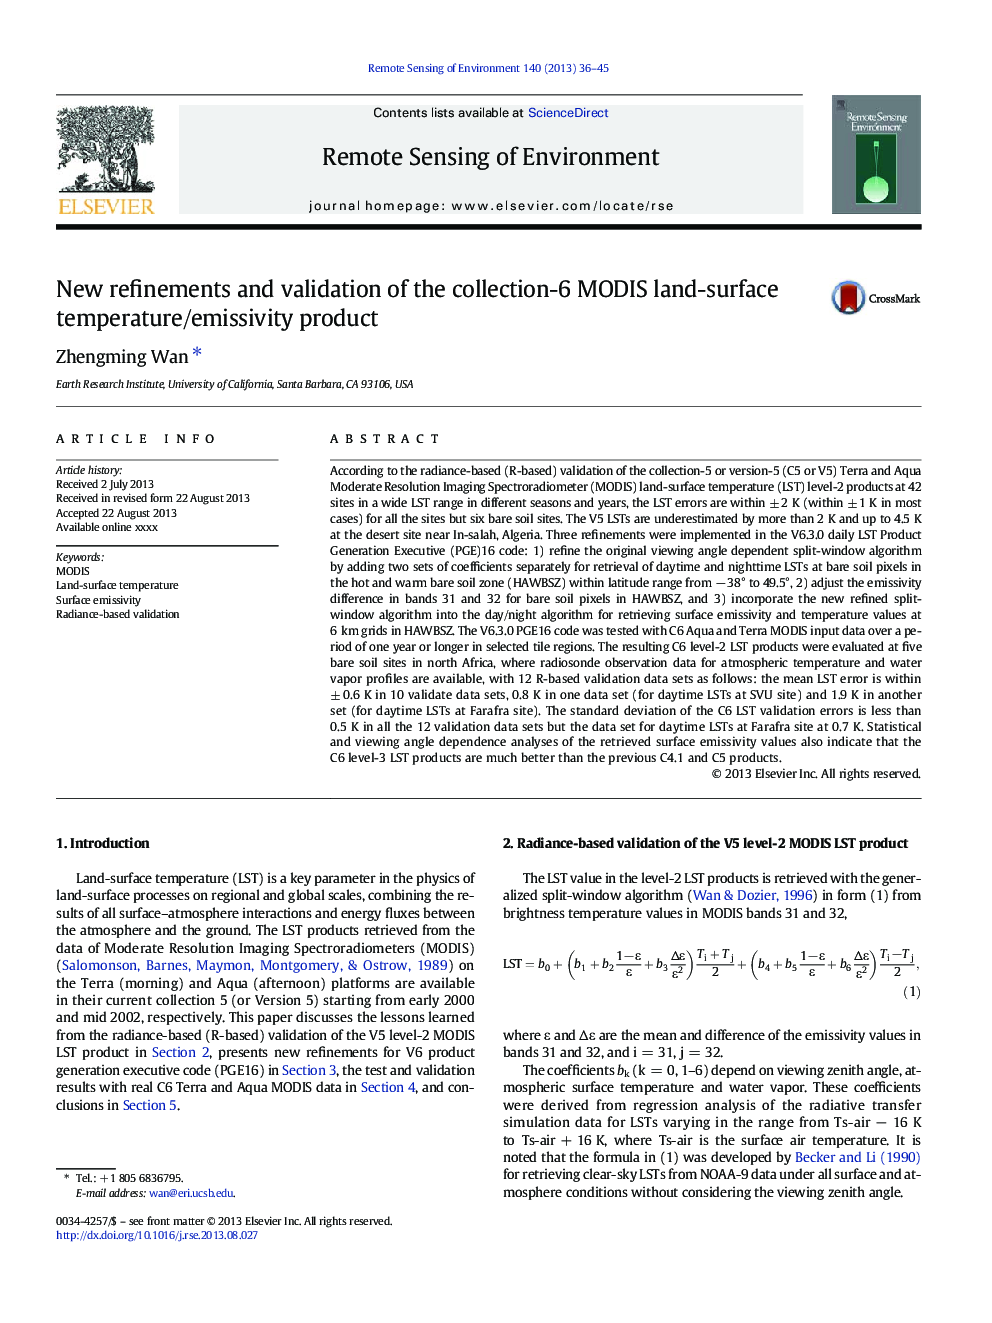 New refinements and validation of the collection-6 MODIS land-surface temperature/emissivity product